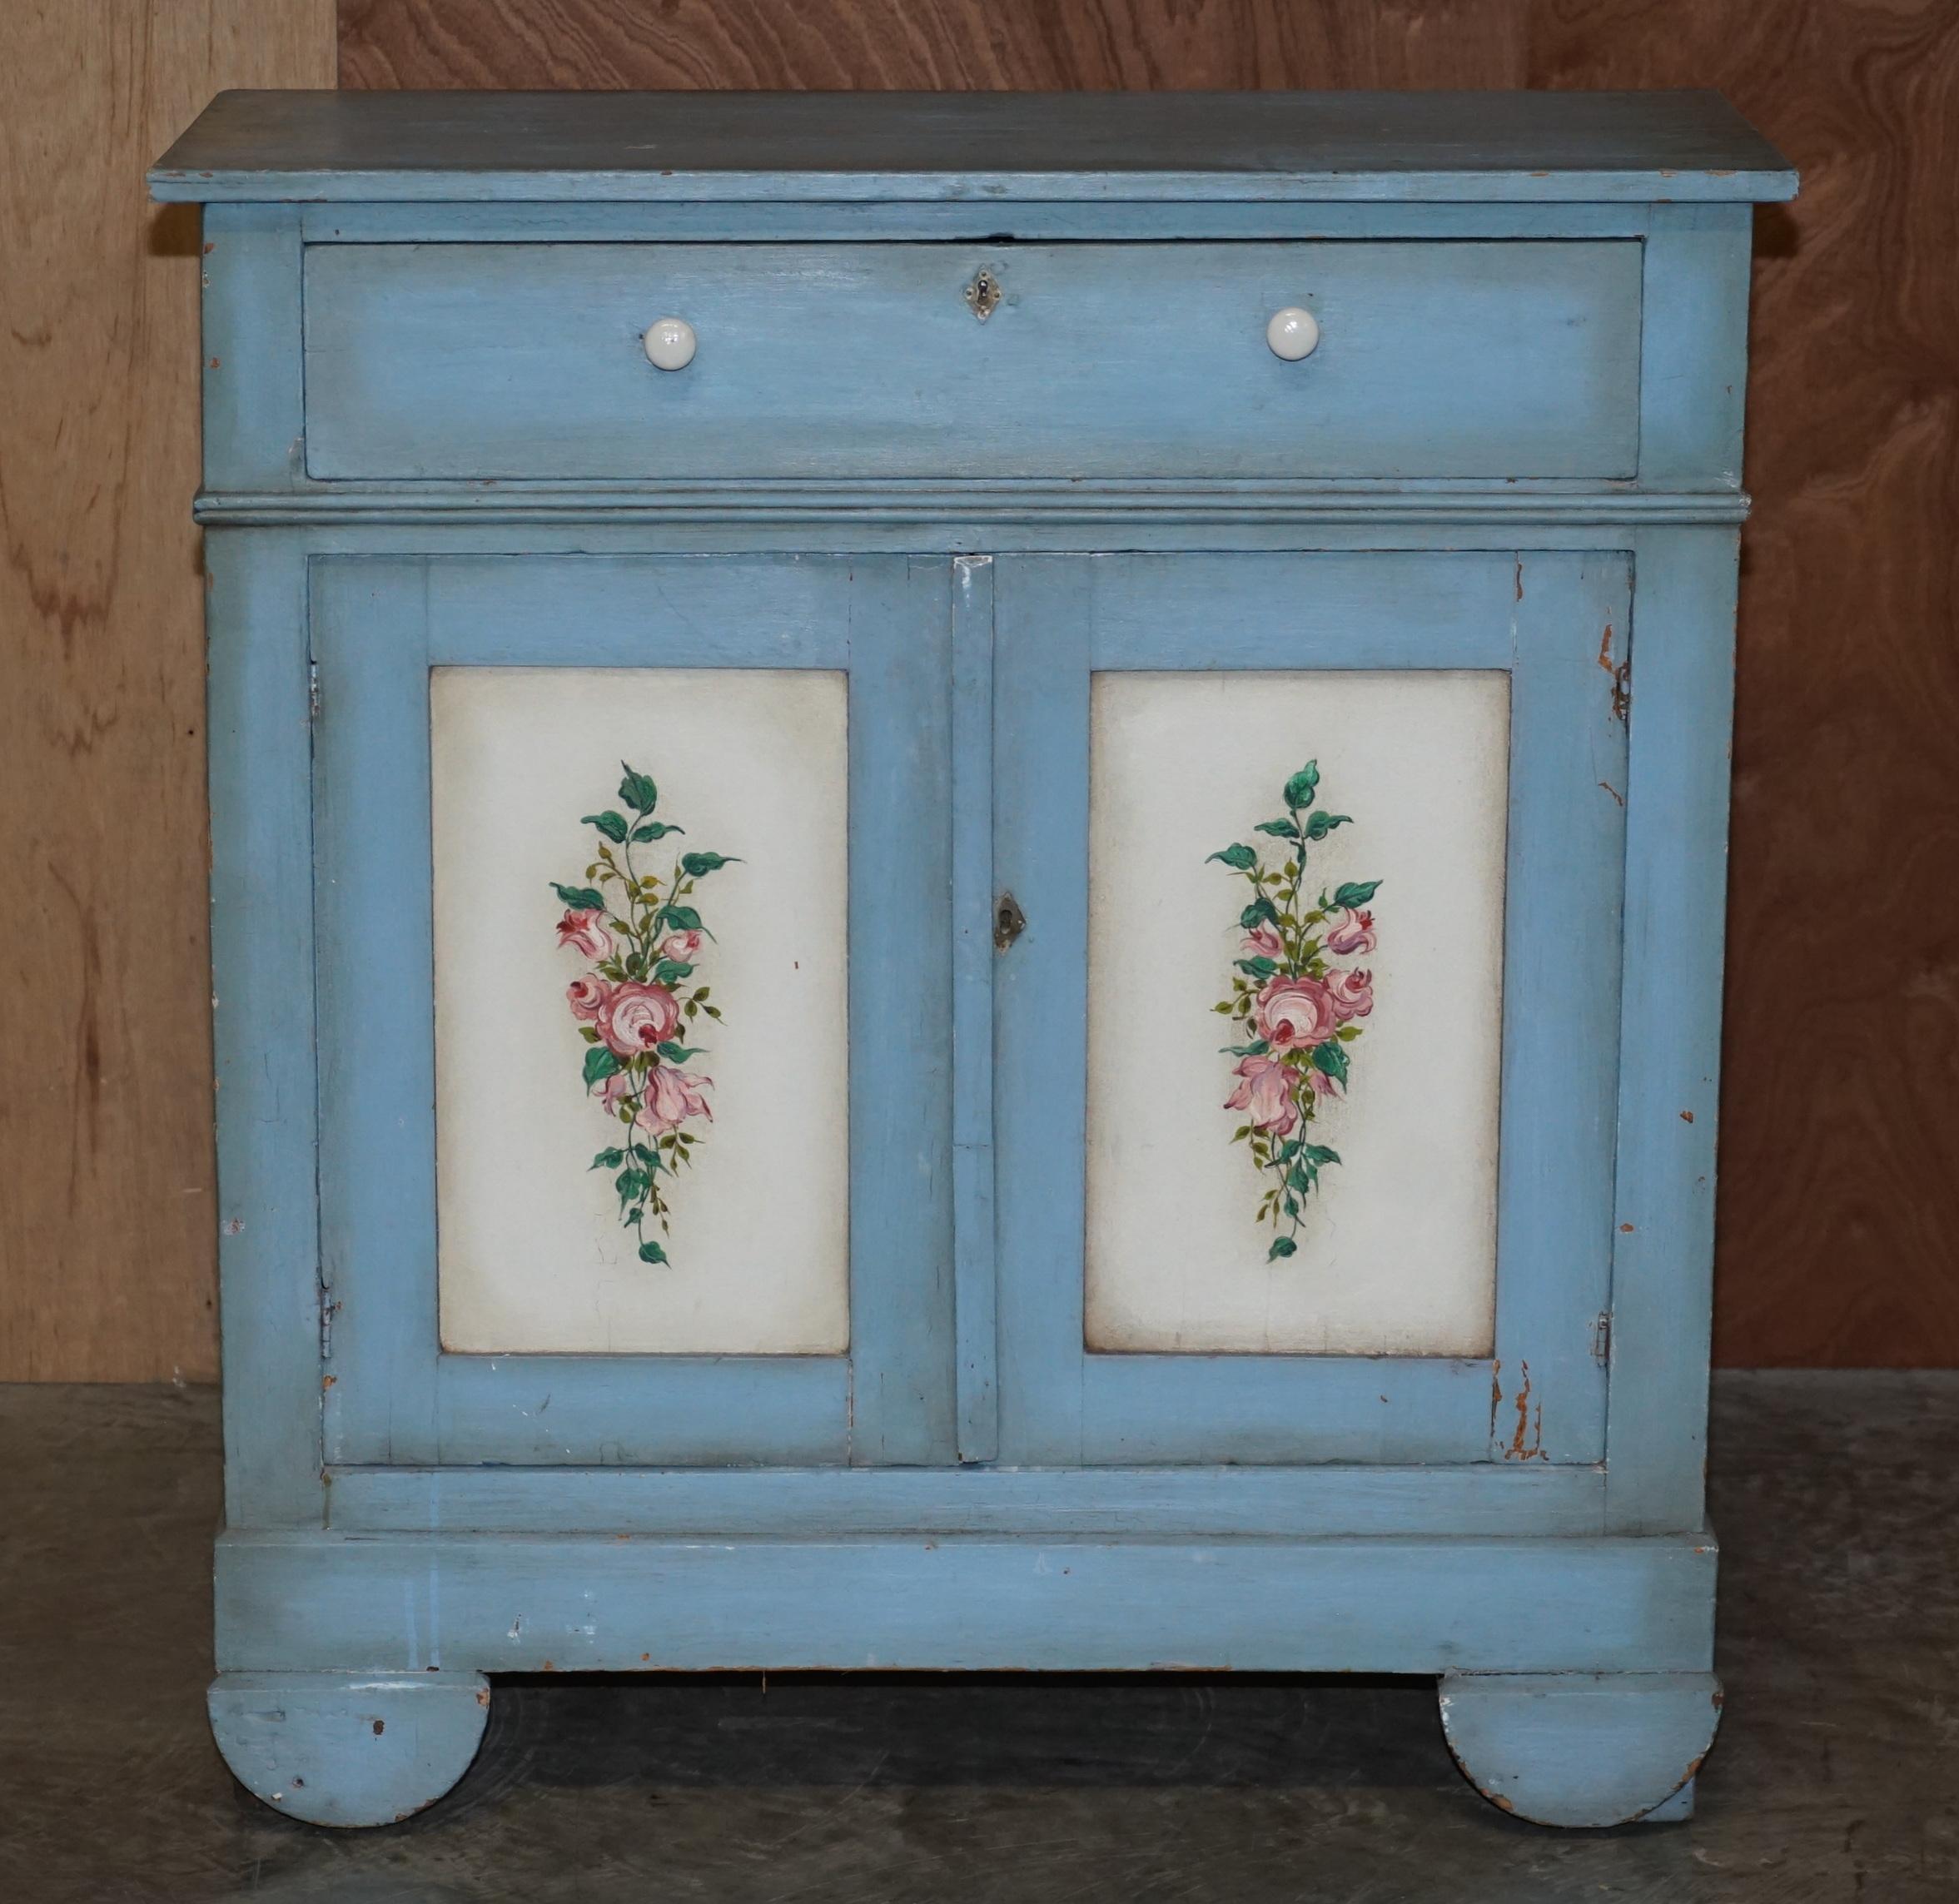 We are delighted to offer this very nice antique, made in France, hand painted duck egg blue, antiqued sideboard or buffet cupboard in pine 

A good looking and well made piece that has nicely aged, I just love the colour, it looks every bit of